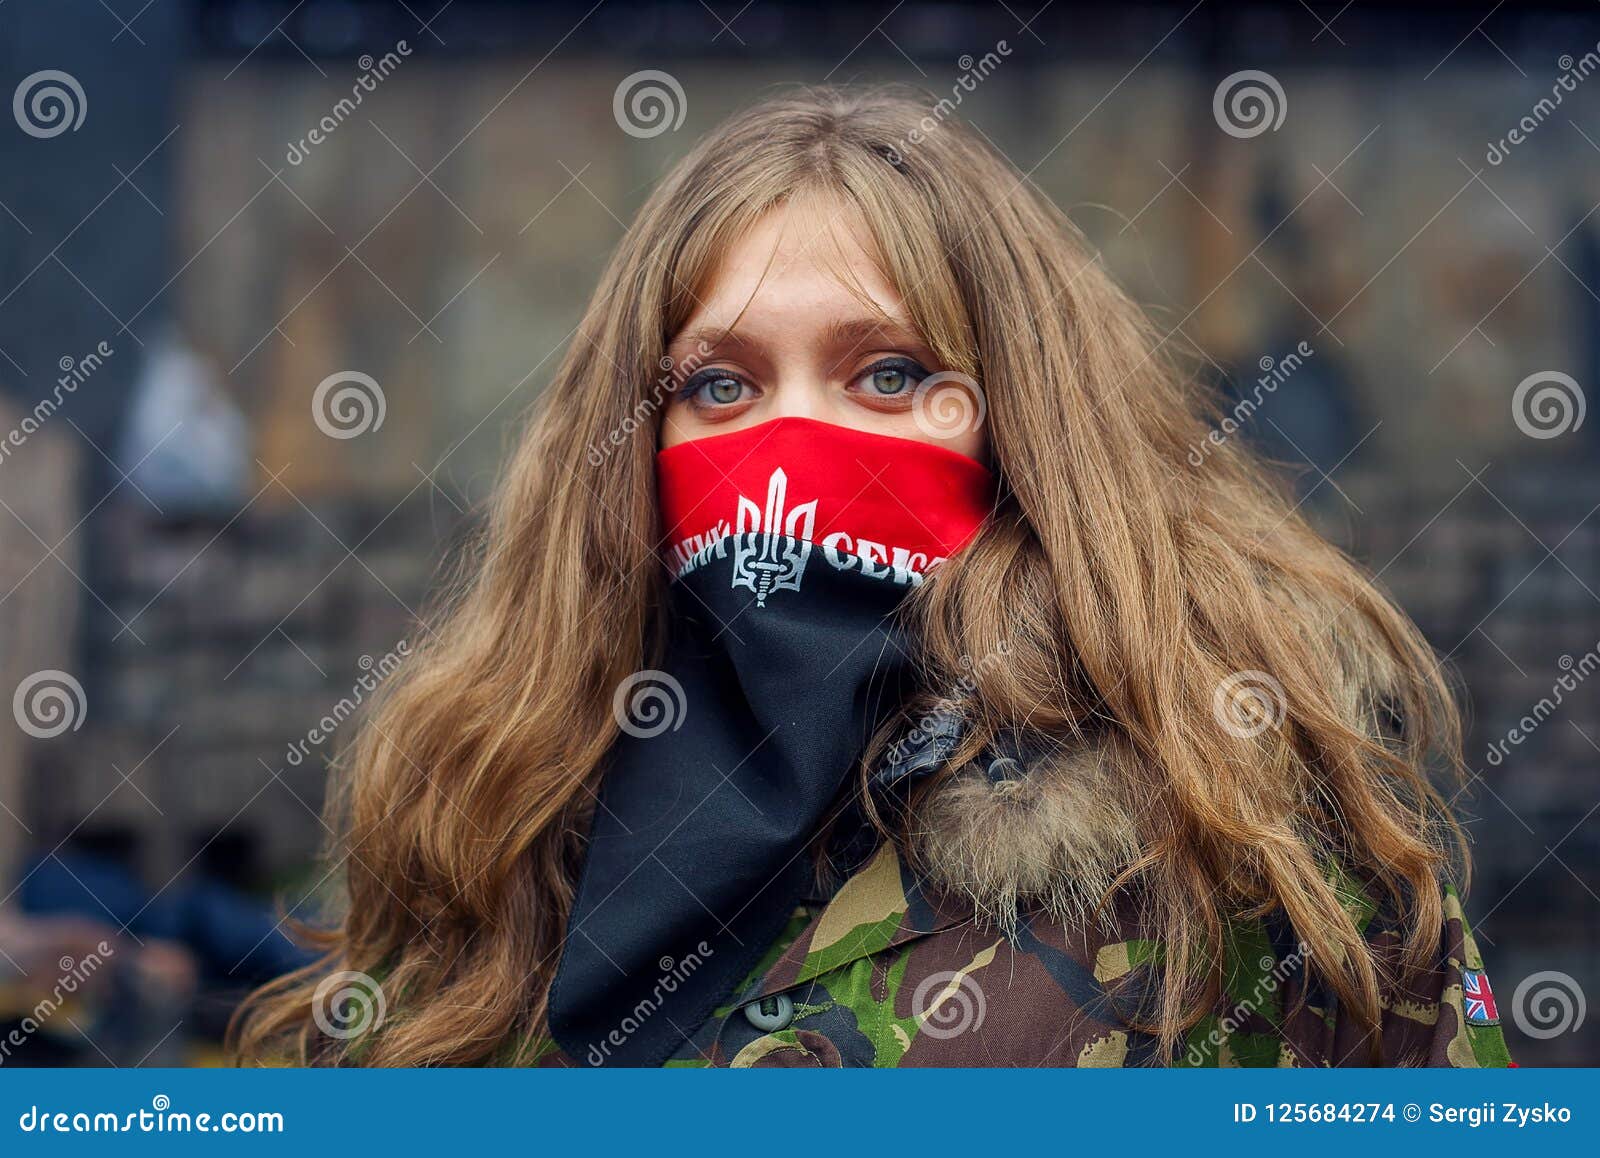 a girl from the right sector during demonstrations on euromaidan. kiev